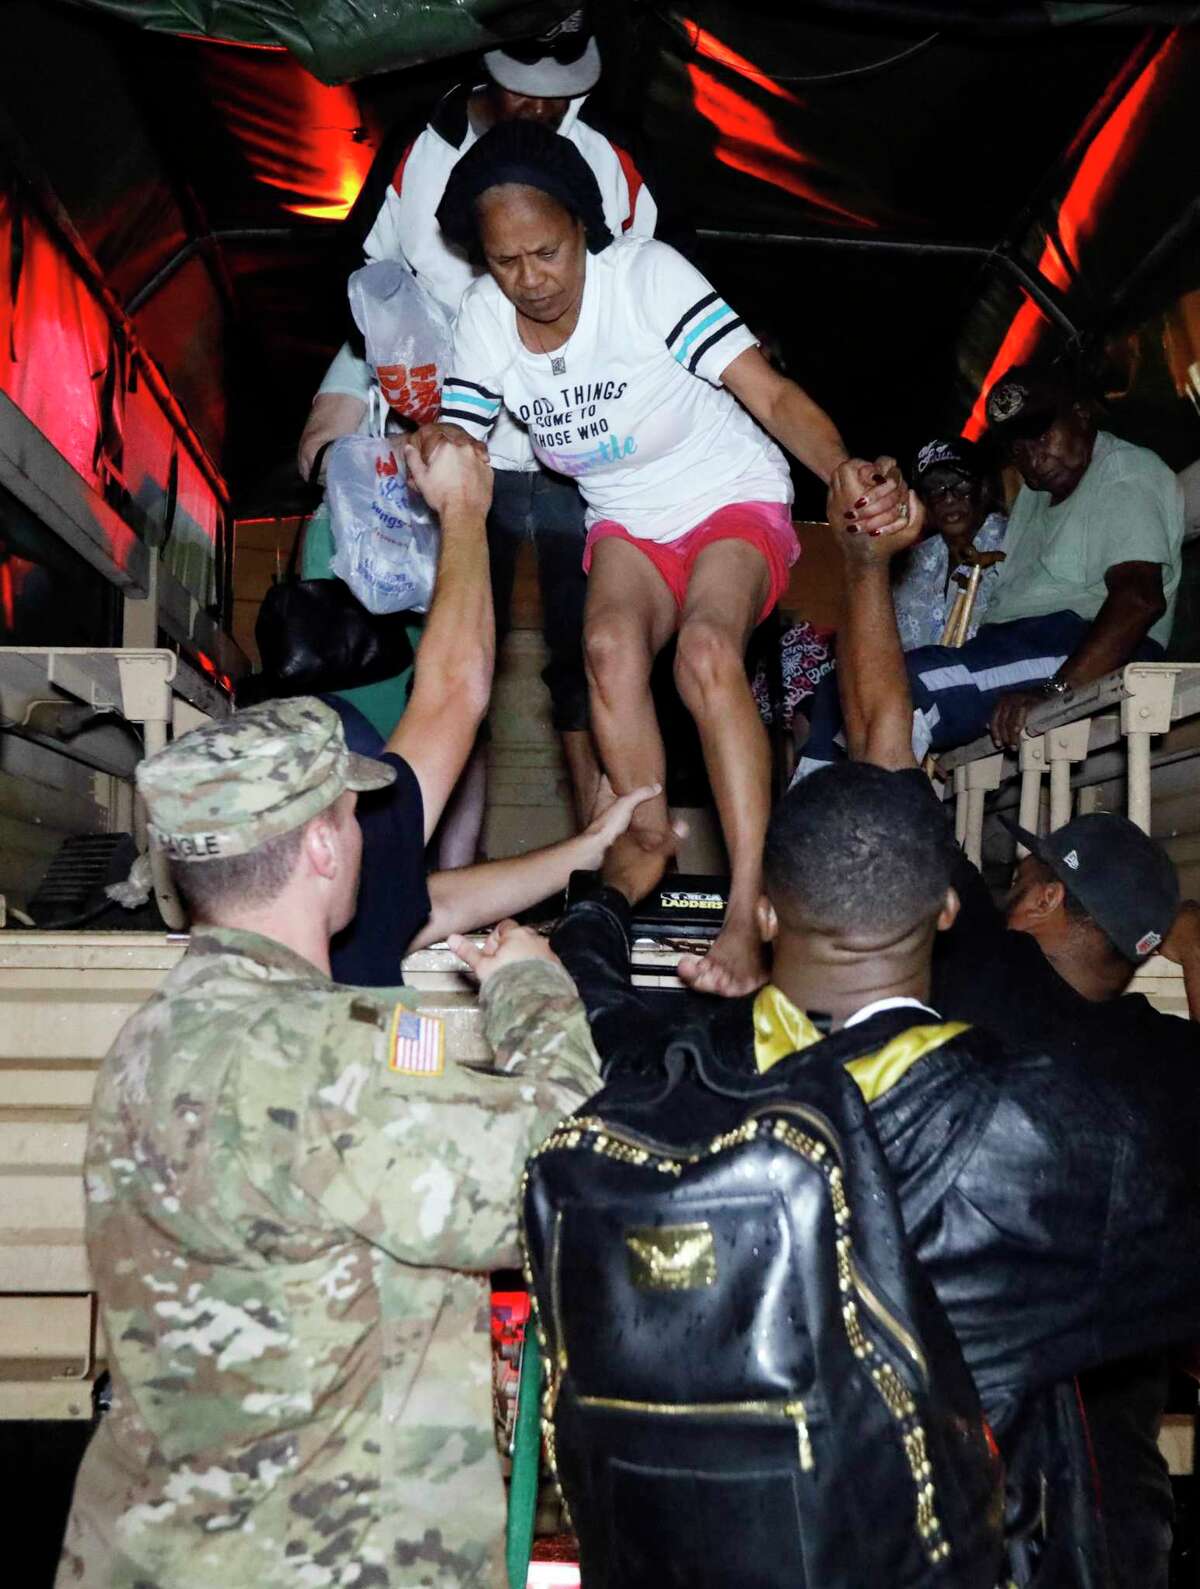 Lake Charles rescue personnel help residents exit from the back of a vehicle late Monday night, Aug. 28, 2017, in Lake Charles, La., after flooding from Harvey's almost constant rain over the last two days overcame the city's drainage system, flooding several subdivisions and necessitating home rescues. (AP Photo/Rogelio V. Solis)